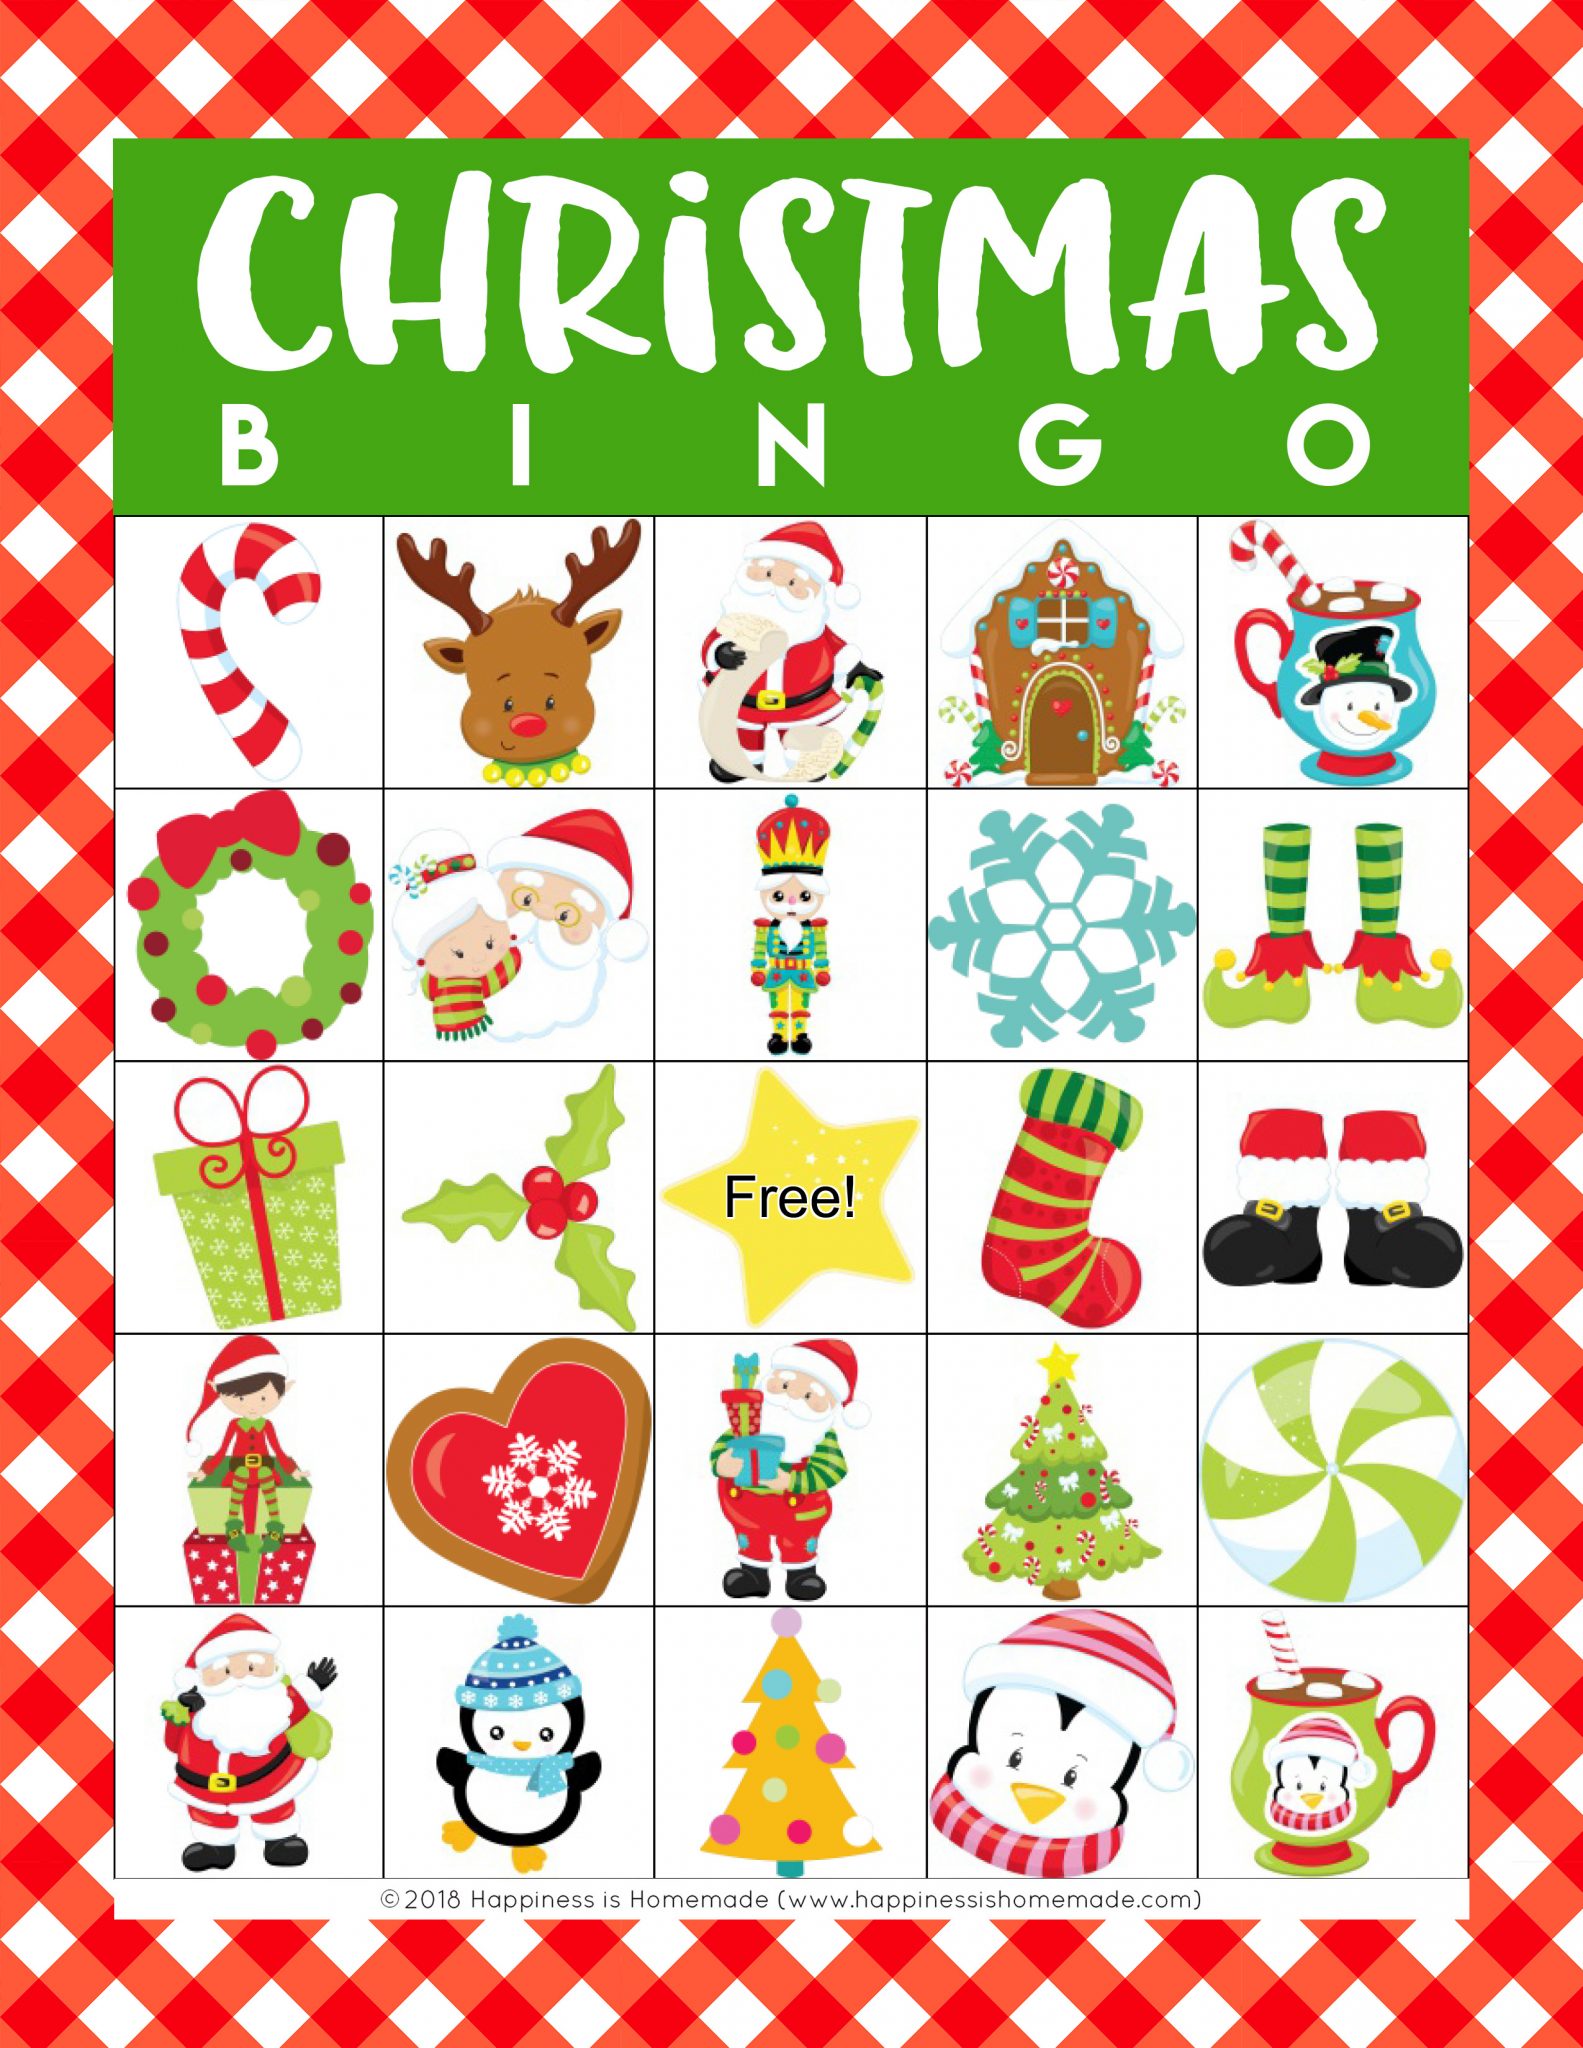 free-printable-winter-bingo-for-class-parties-with-text-overlay-that